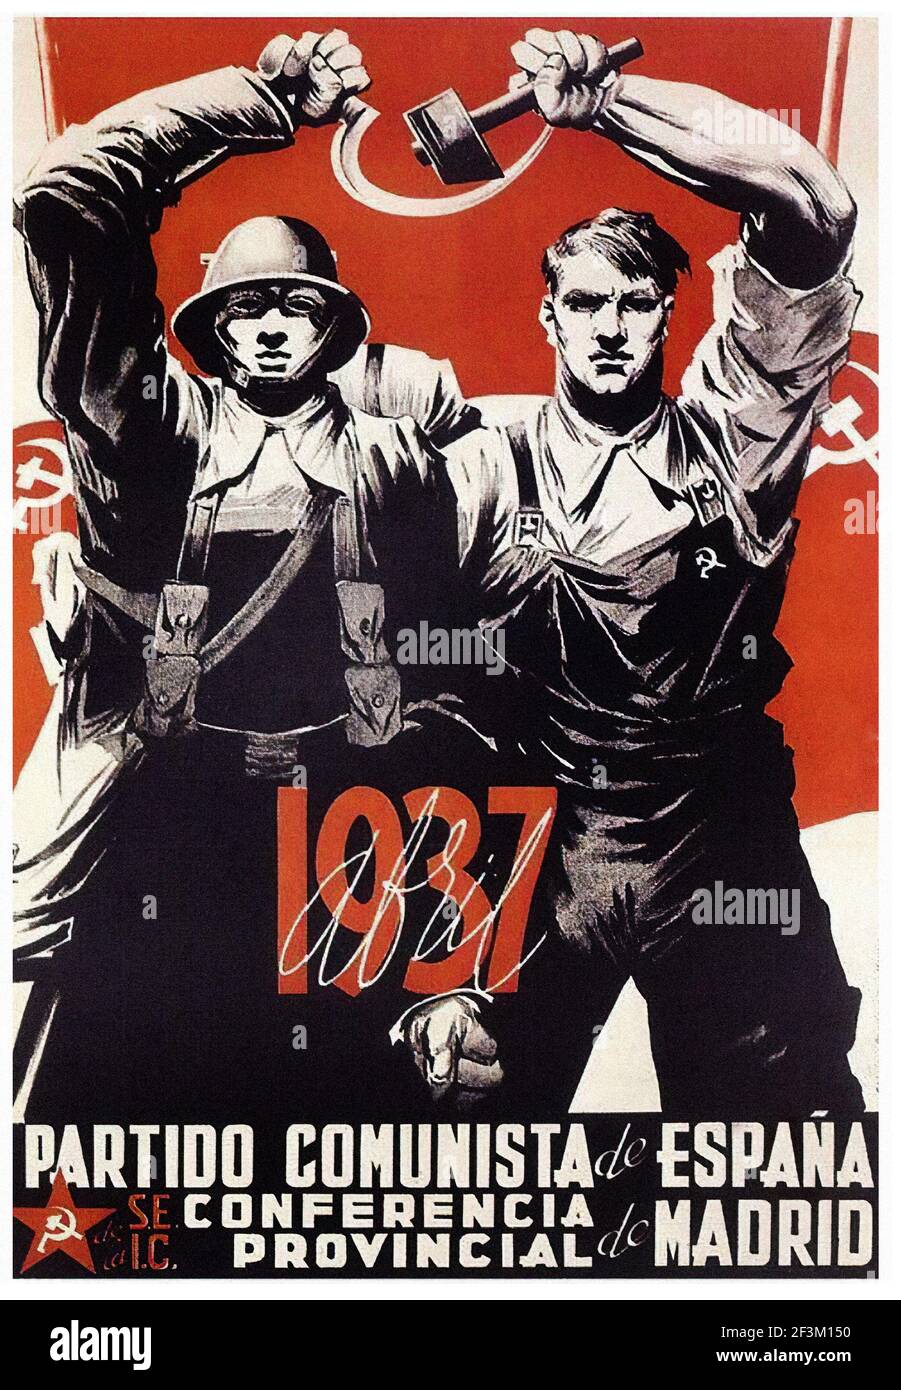 Spanish Civil War propaganda poster. Provincial conference of Madrid, Communist party of Spain, 1937. Stock Photo